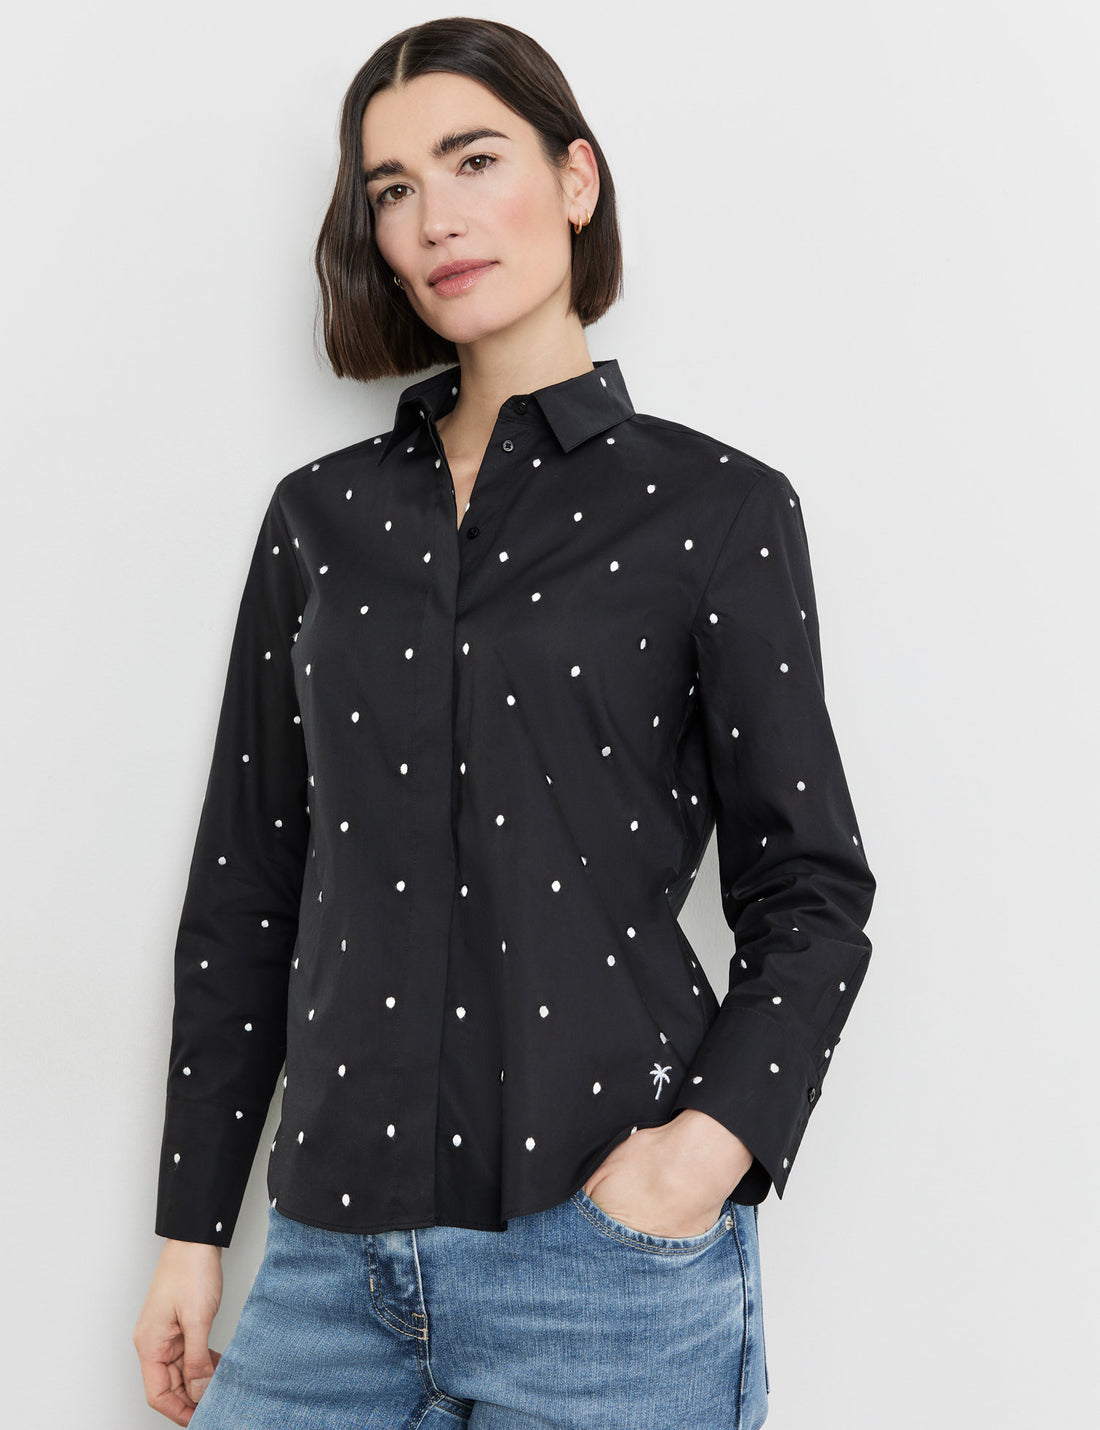 Long Sleeve Cotton Blouse With Lined Side Vents_260056-66410_1000_01